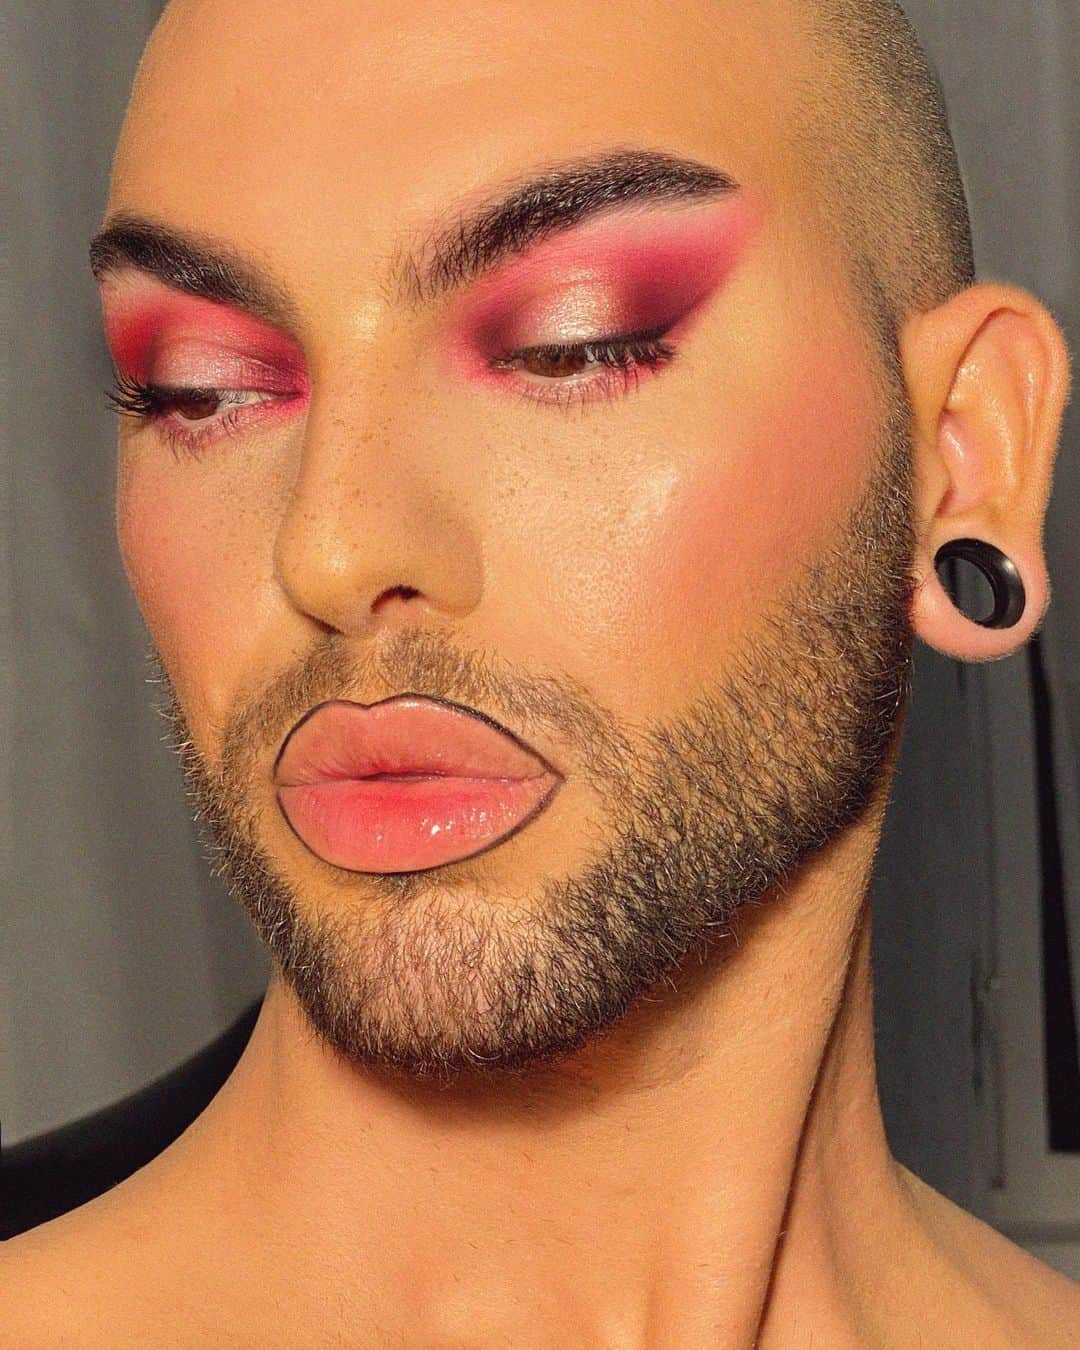 A riel D iazのインスタグラム：「Hi babe 🥺🥰  @natashadenona circoloco palette on the eyes. @rarebeauty liquid touch foundation & concealer as well as perfect strokes liner on the eyes and lips.  @artistcouture lotus love blush. @rcma no color pressed powder. @colourpopcosmetics clear gloss.  @danessa_myricks power bronzer cream.  @maccosmetics chestnut liner for freckles.」